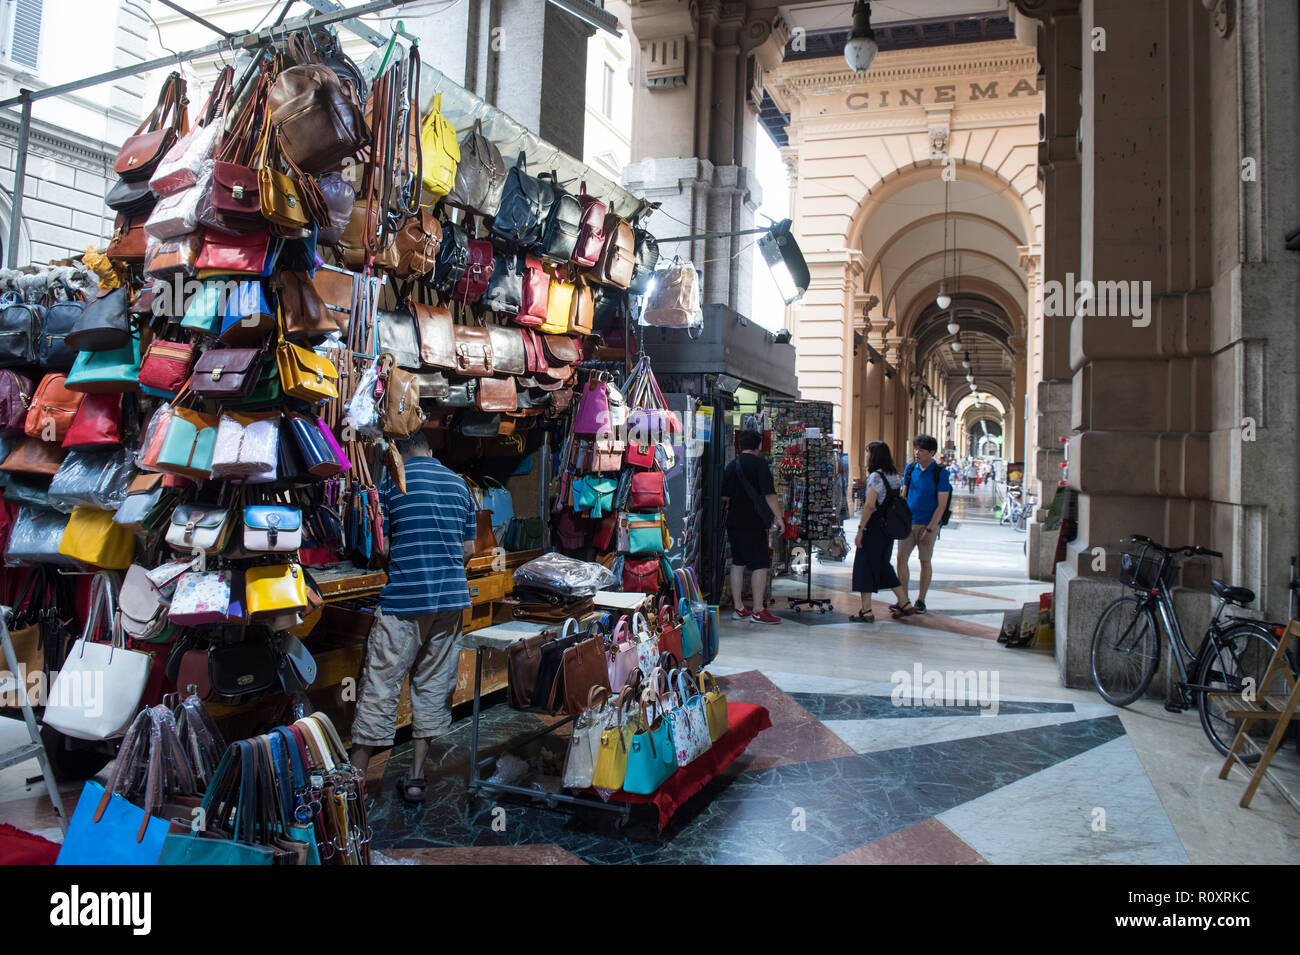 Shopping on the Via dei Brunelleschi in Florence, Italy Europe Stock Photo